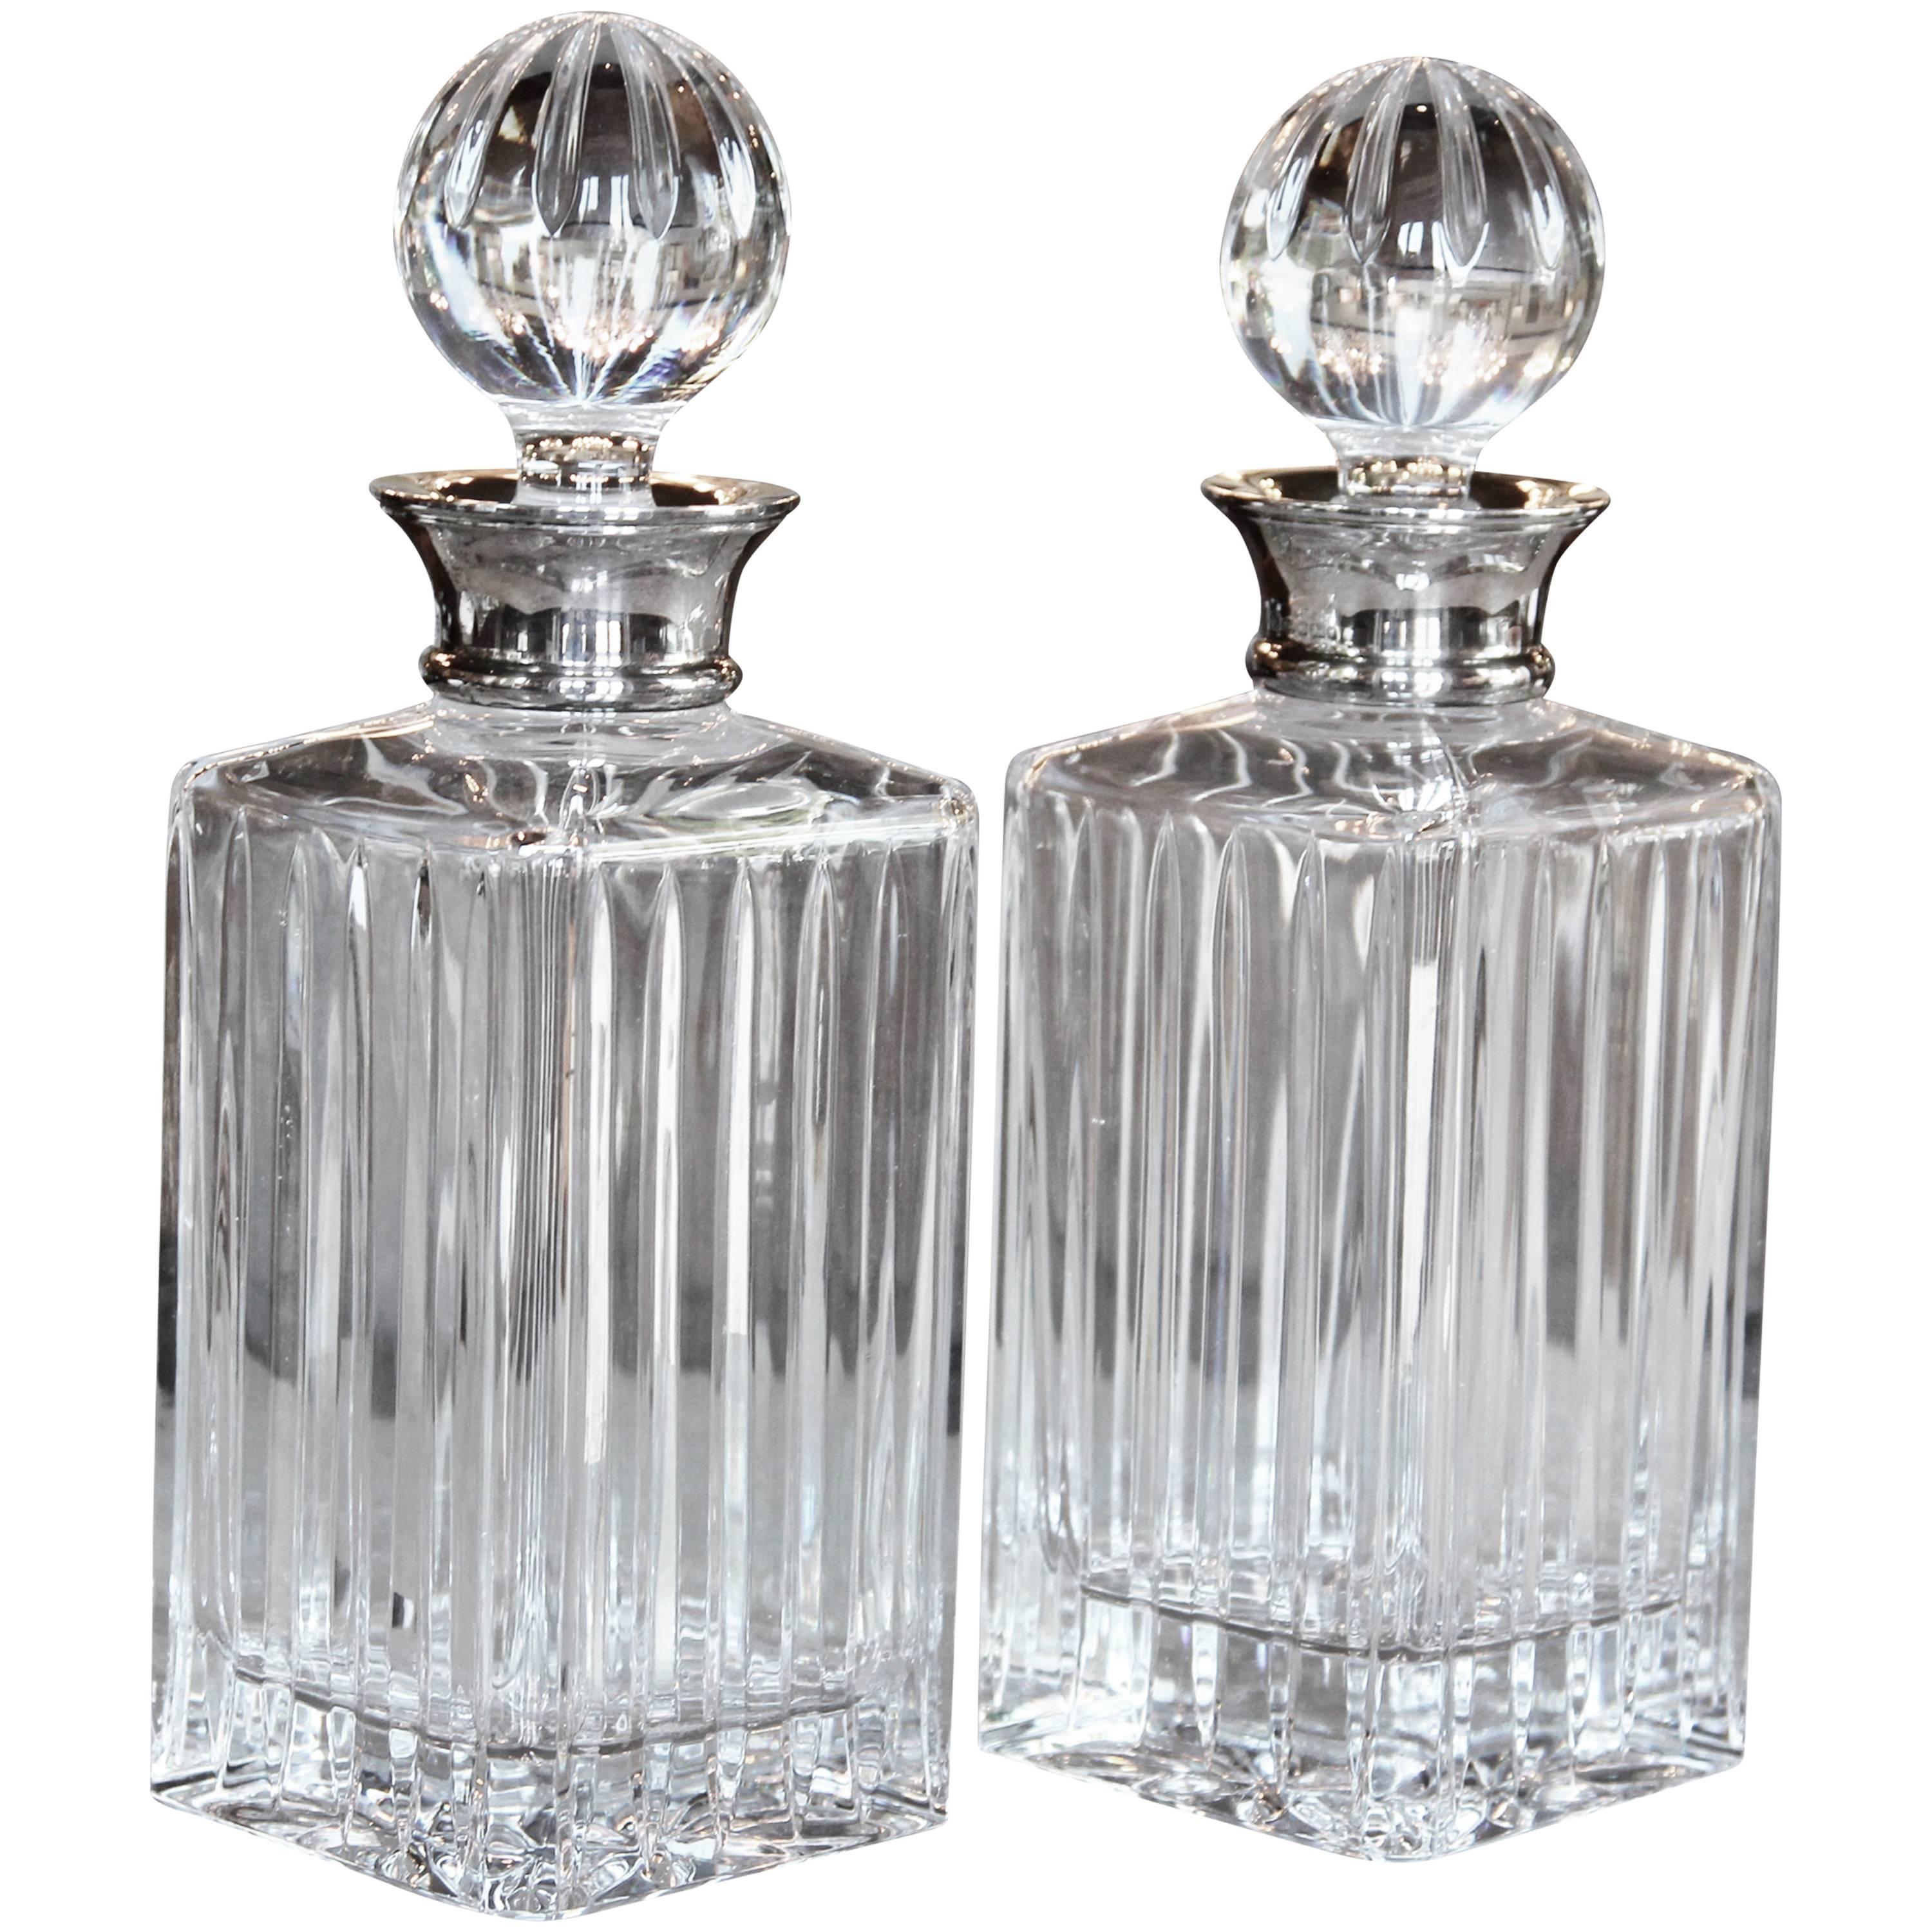 Pair of English Crystal Decanters with Sterling Silver Necks